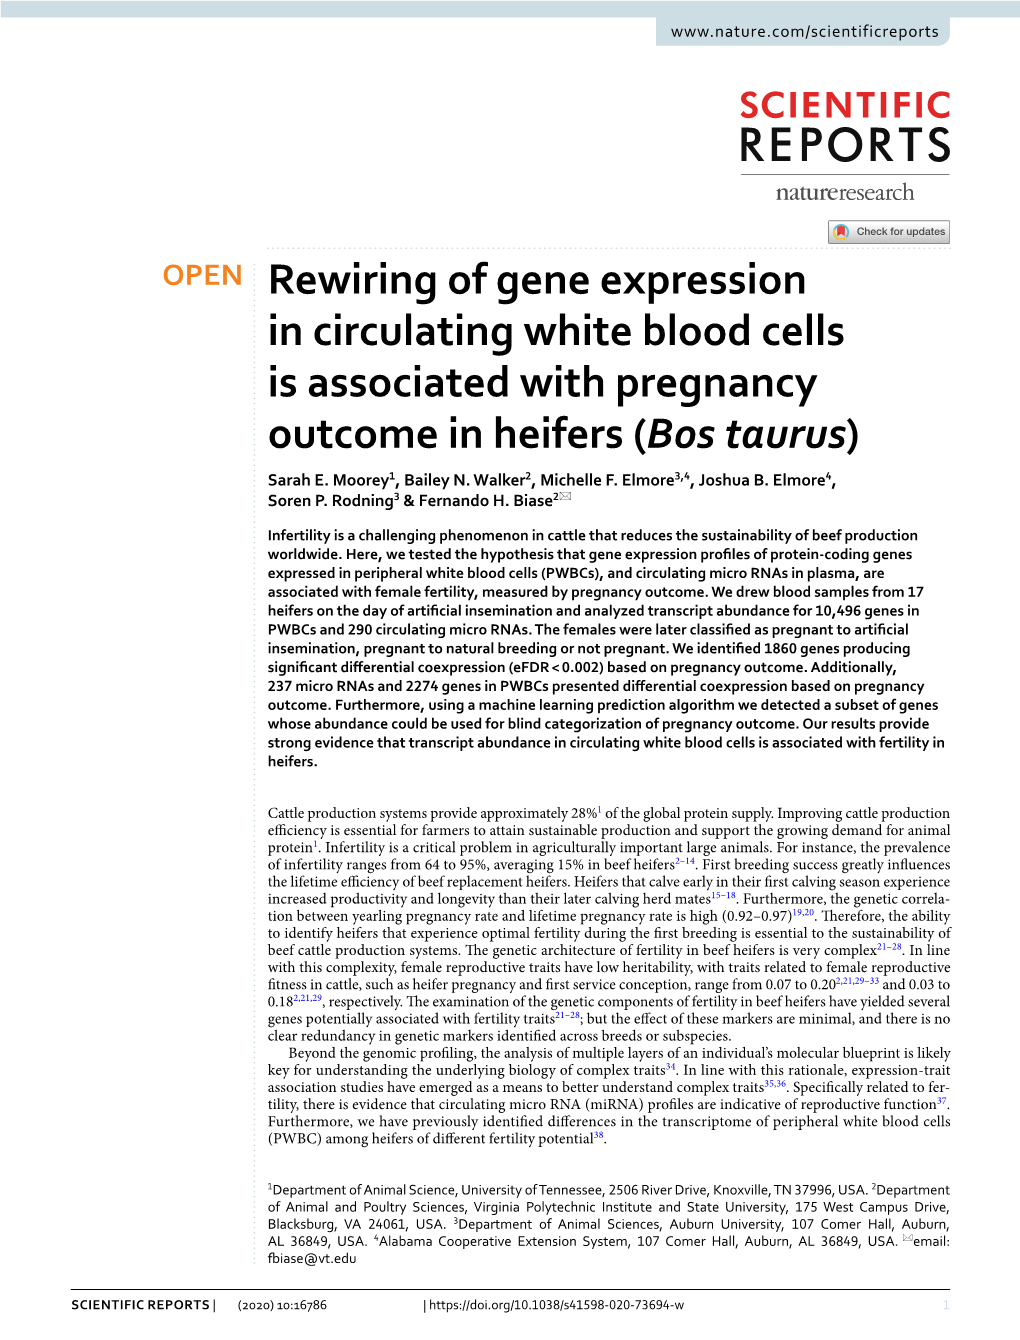 Rewiring of Gene Expression in Circulating White Blood Cells Is Associated with Pregnancy Outcome in Heifers (Bos Taurus) Sarah E